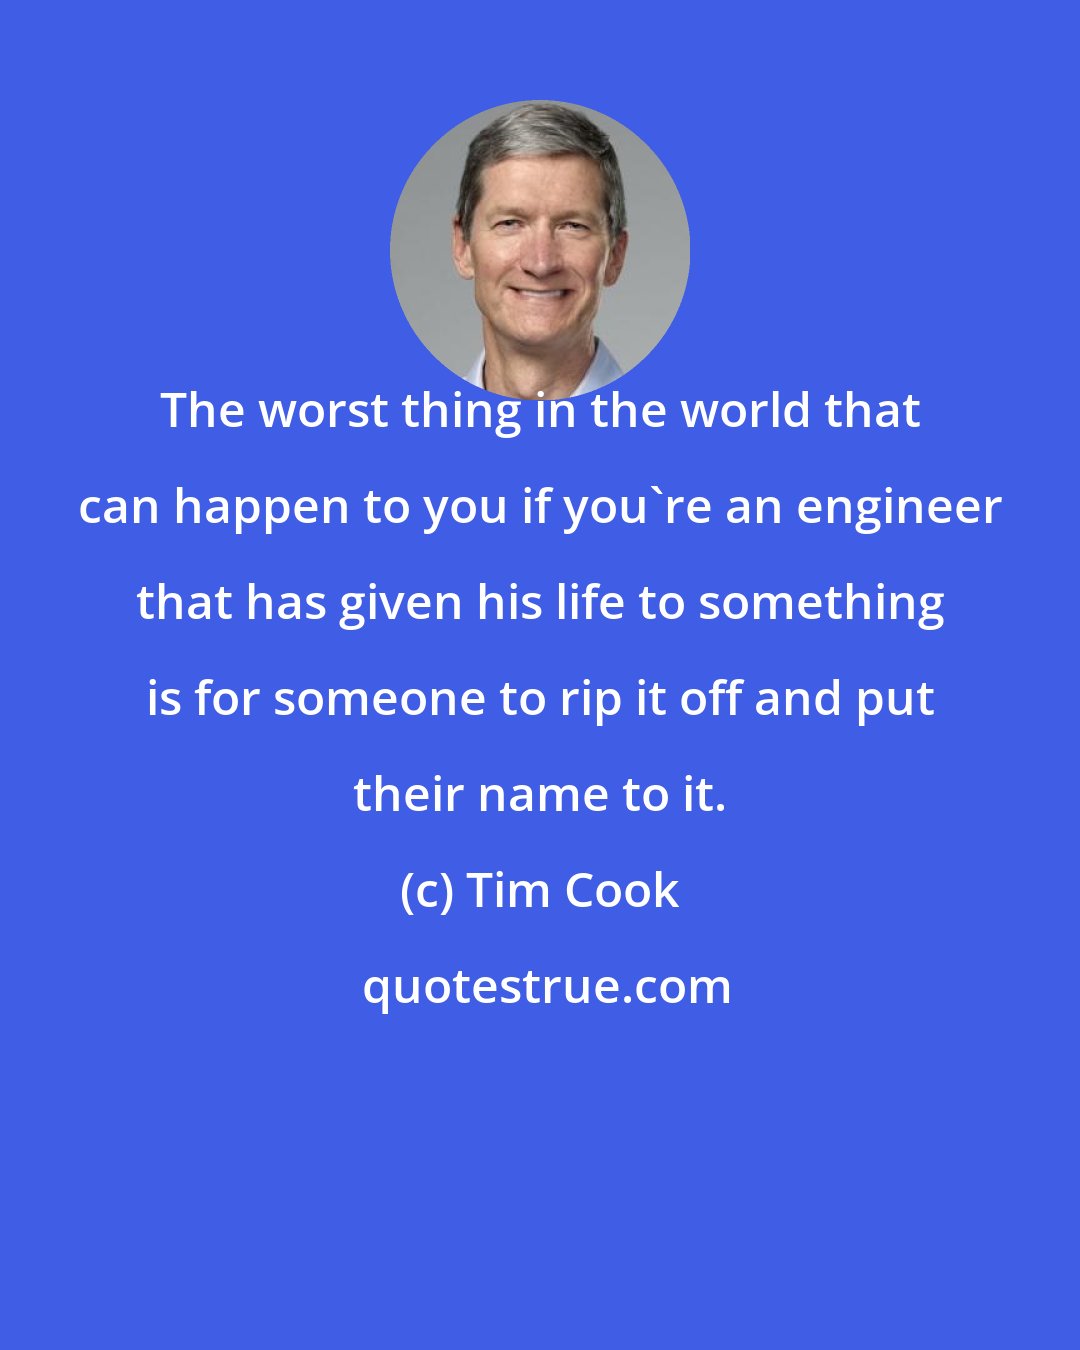 Tim Cook: The worst thing in the world that can happen to you if you're an engineer that has given his life to something is for someone to rip it off and put their name to it.